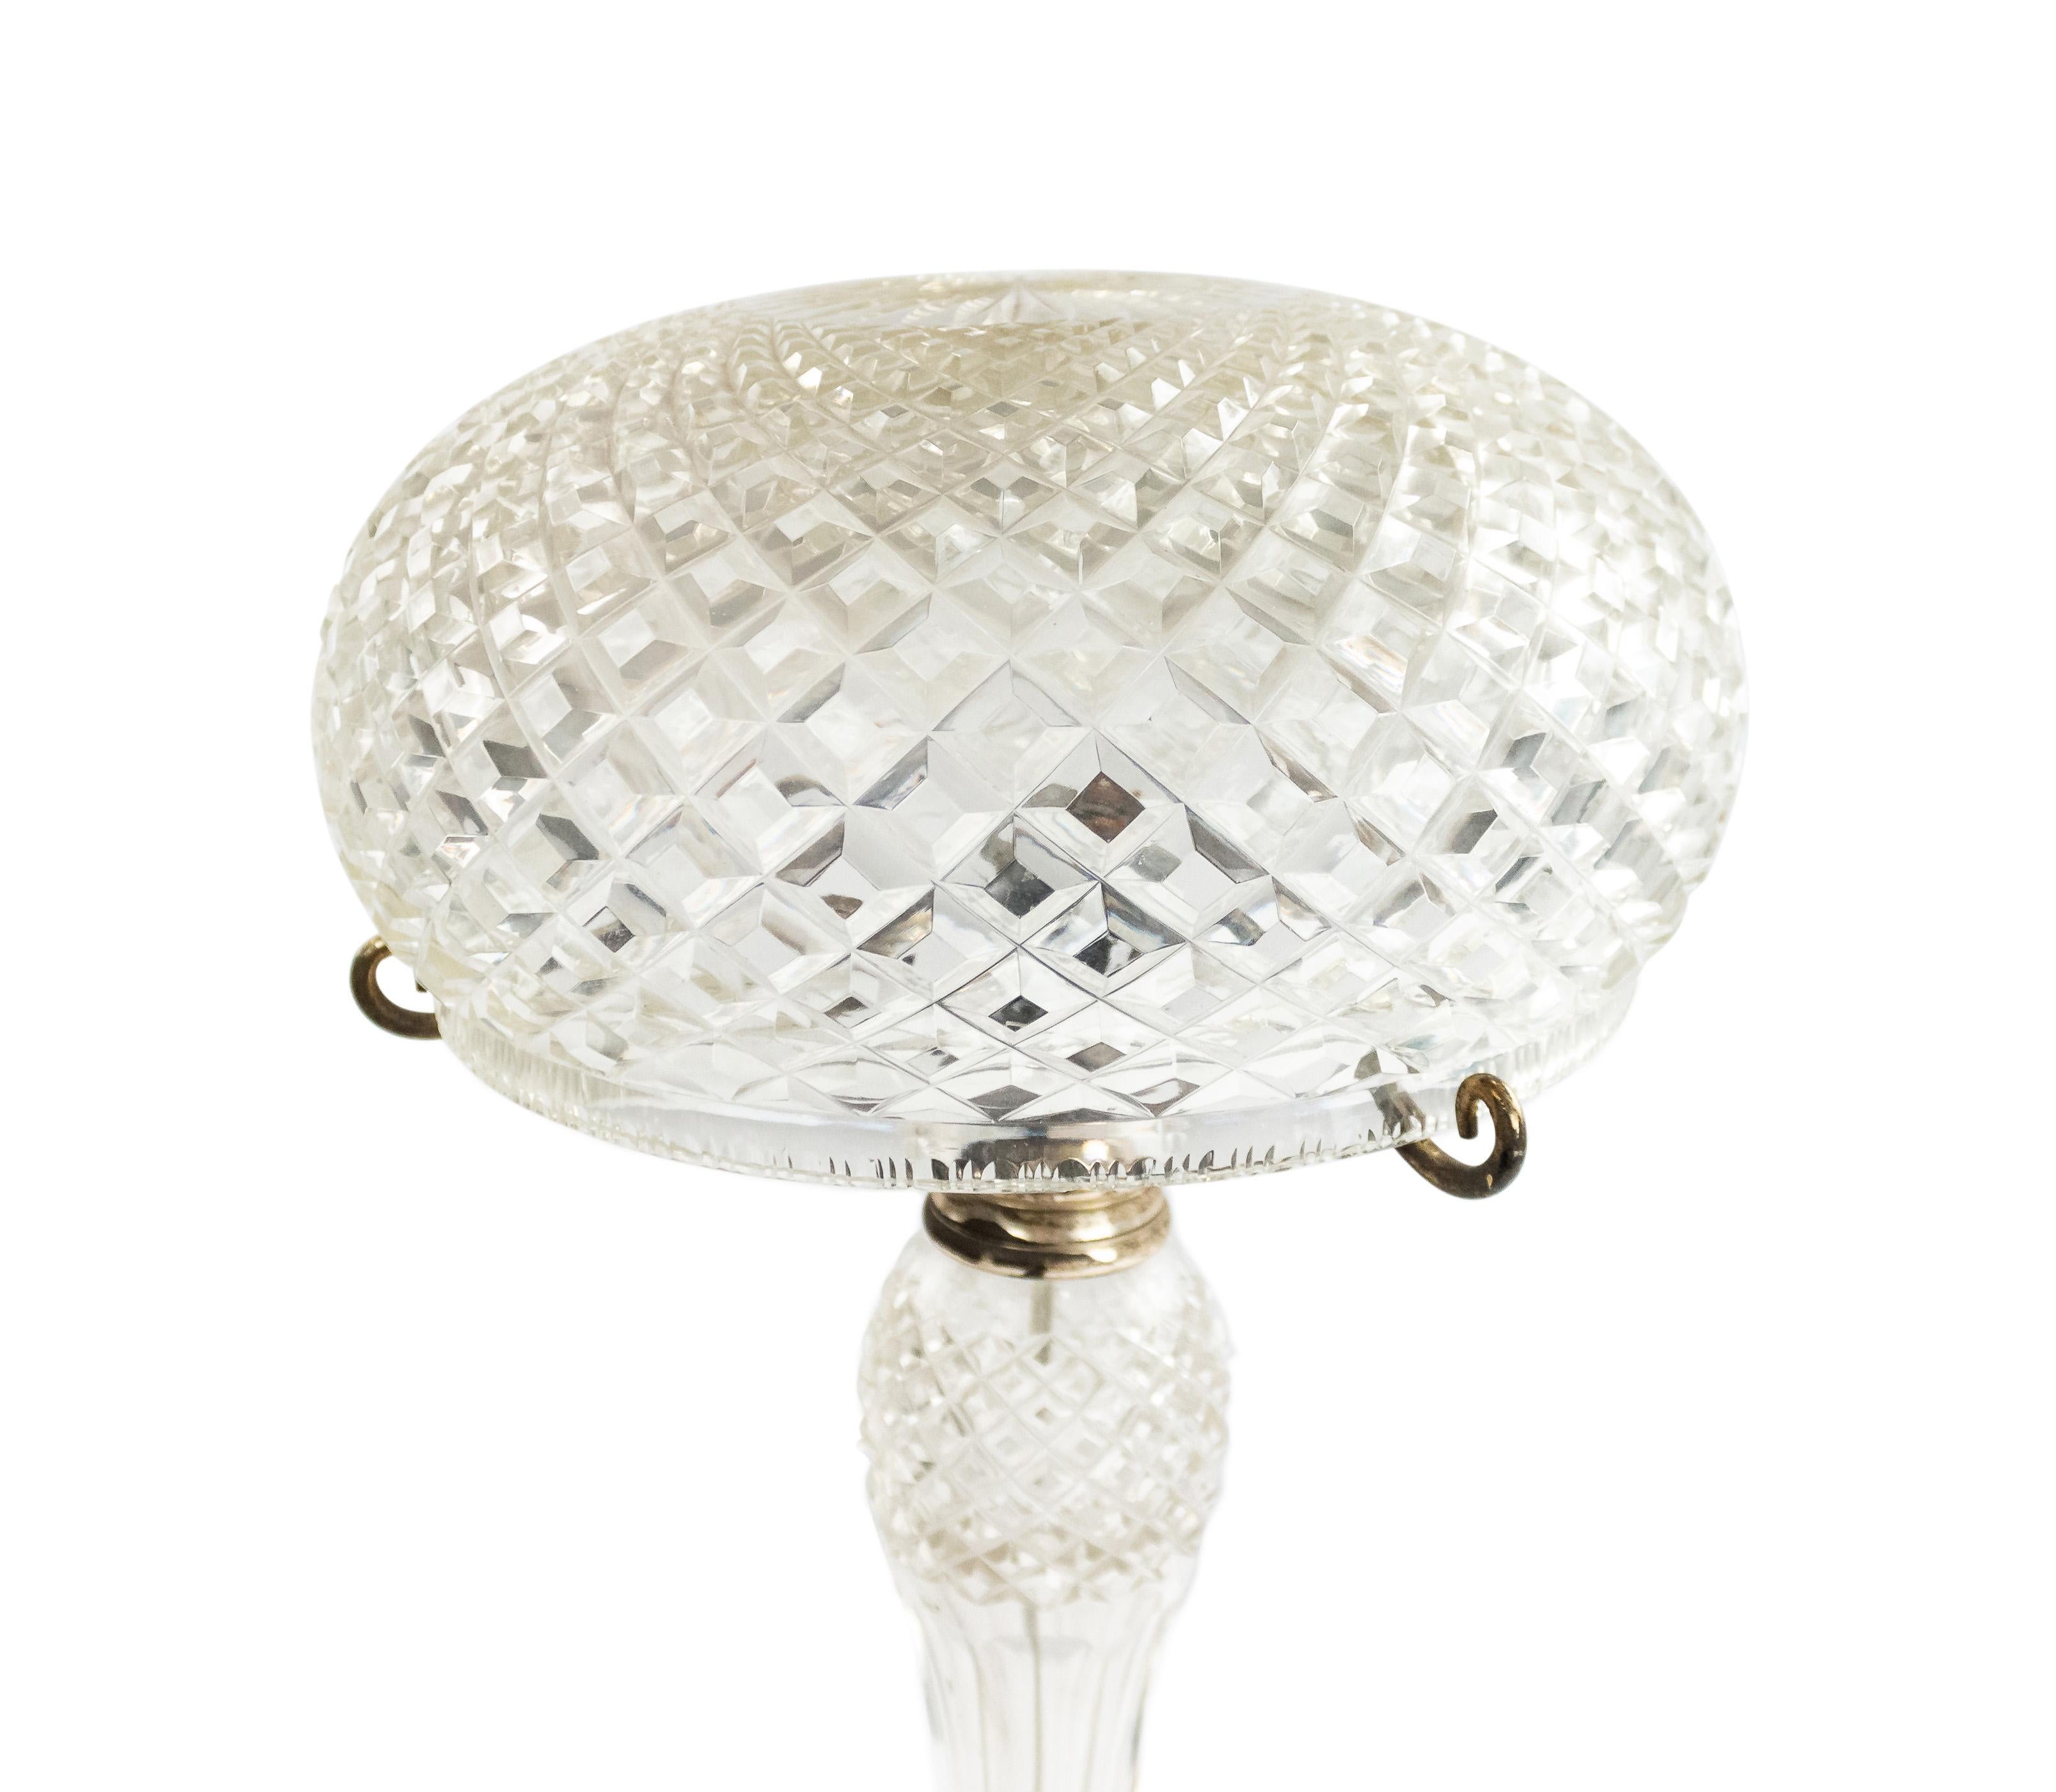 English Victorian cut crystal table lamp with dome shaped shade and square geometric design.